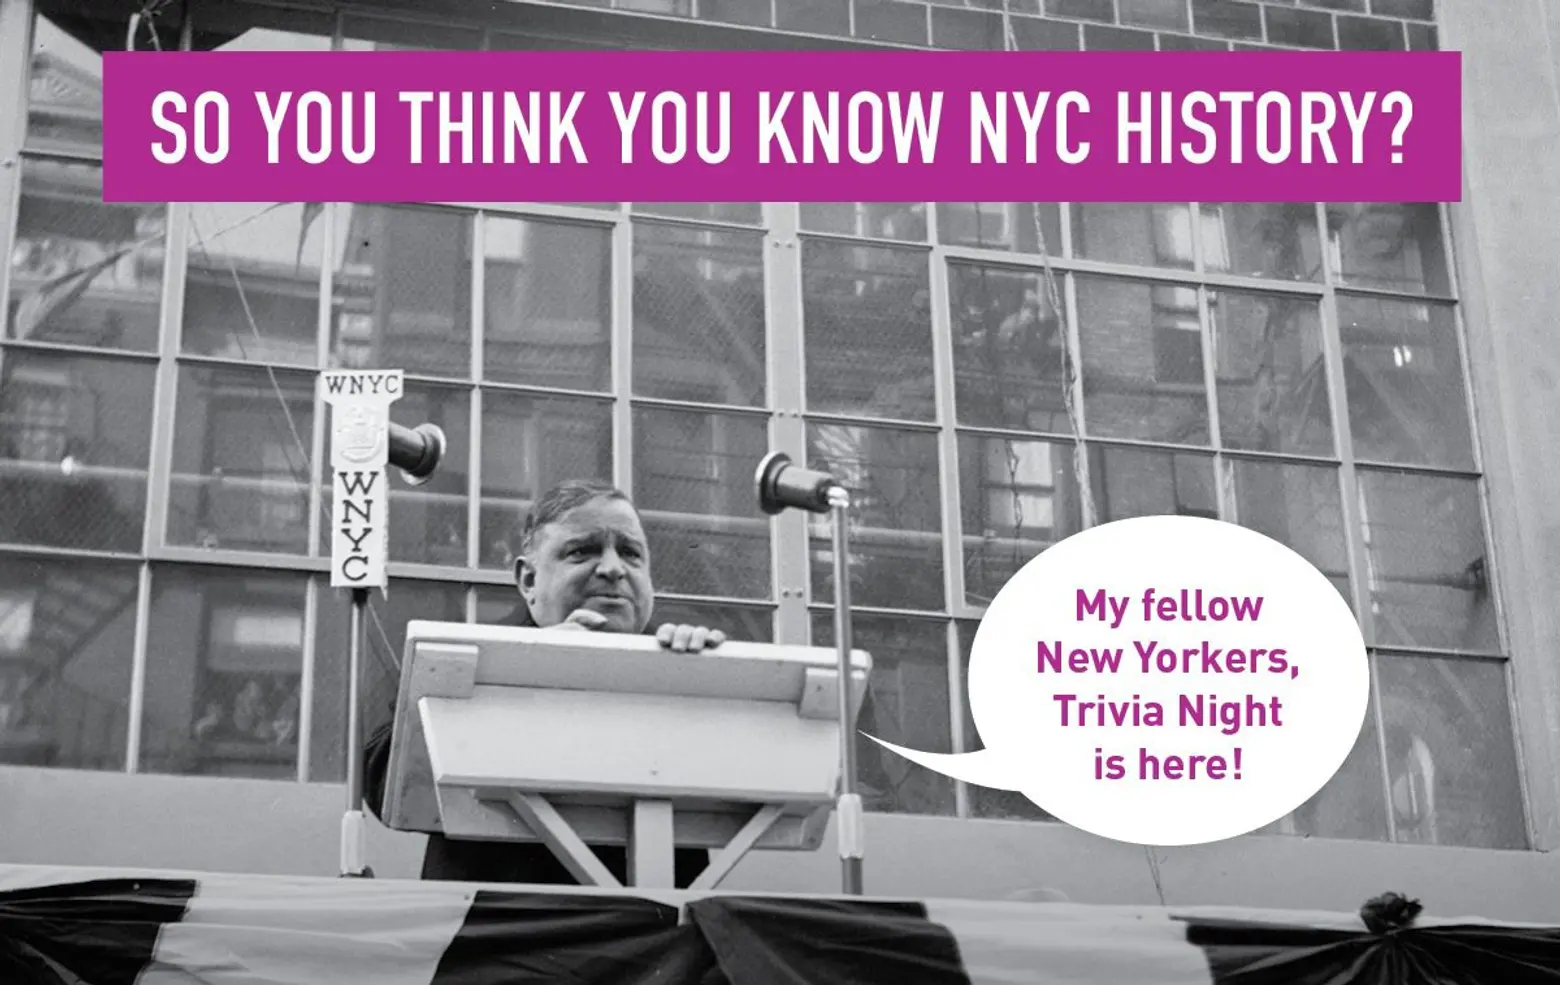 Test your NYC history knowledge with this quiz from Urban Archive